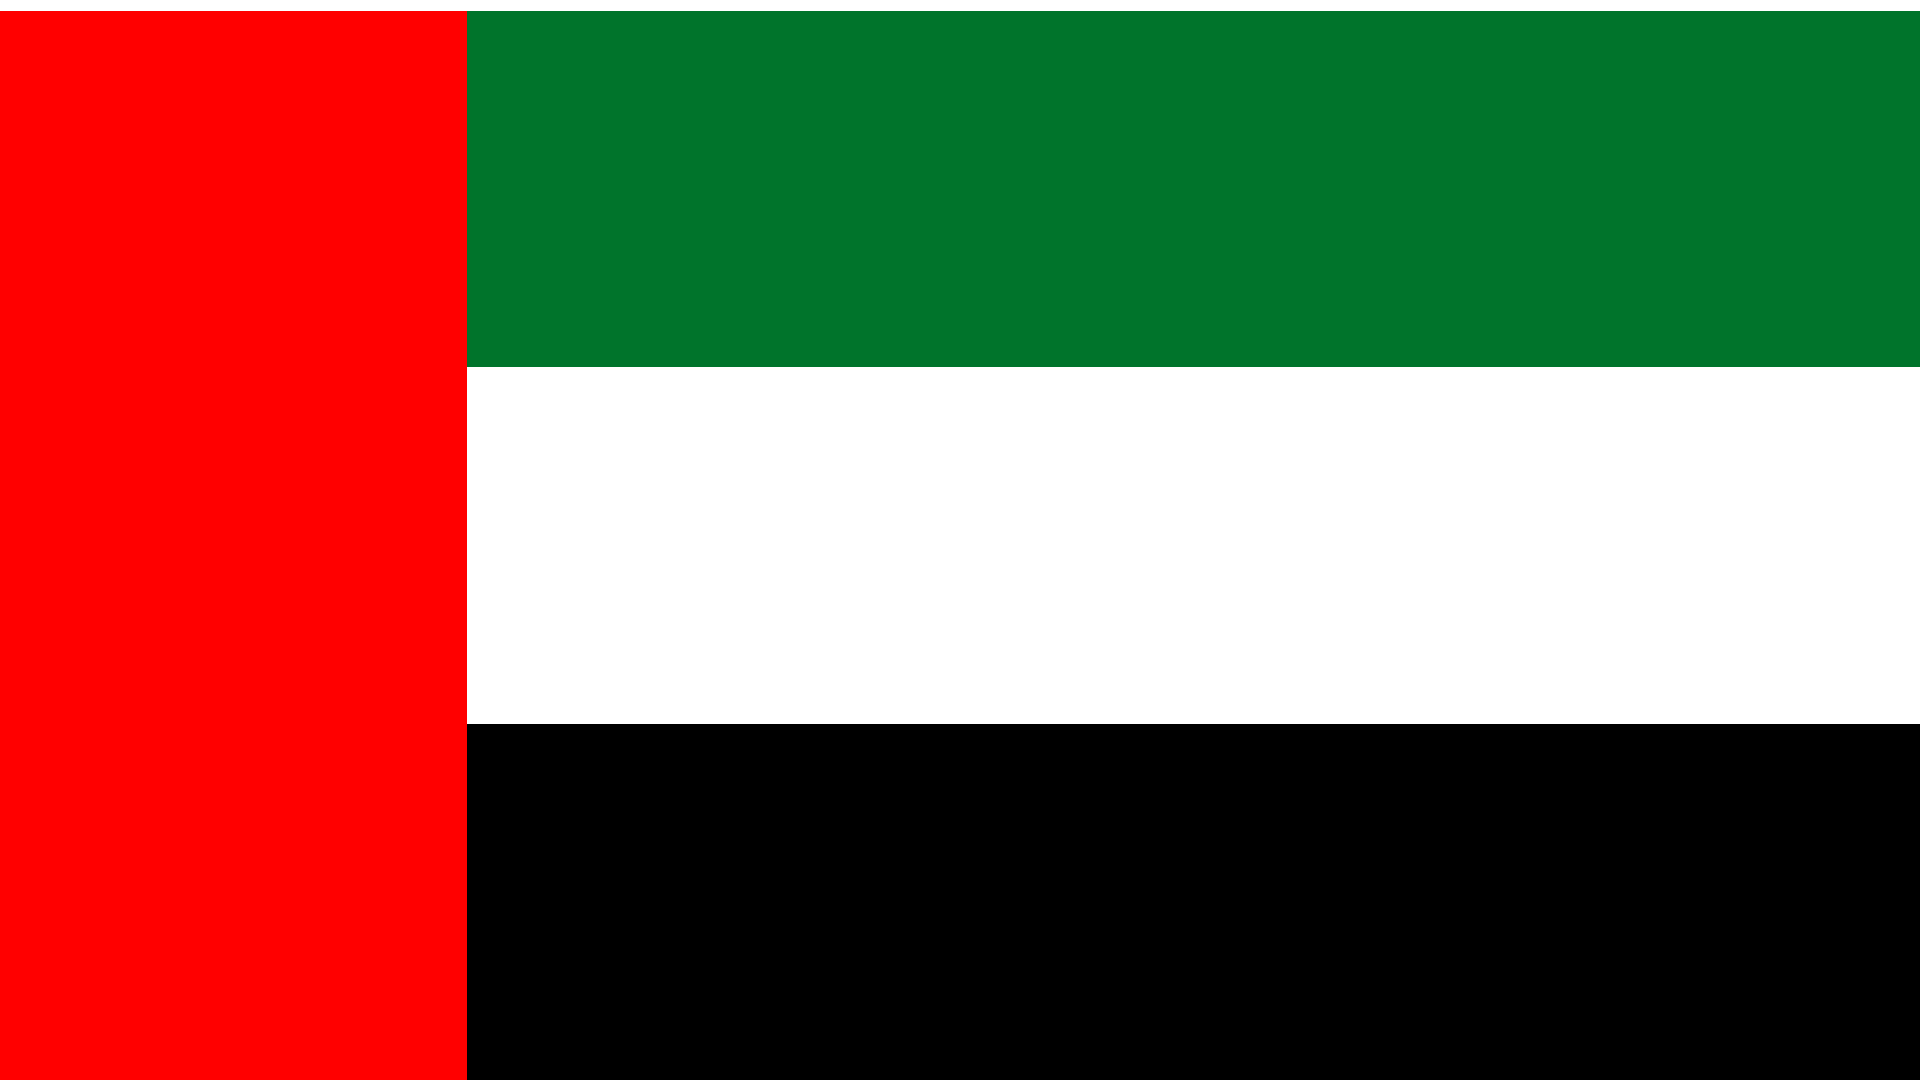 An image of the flag of the United Arab Emirates